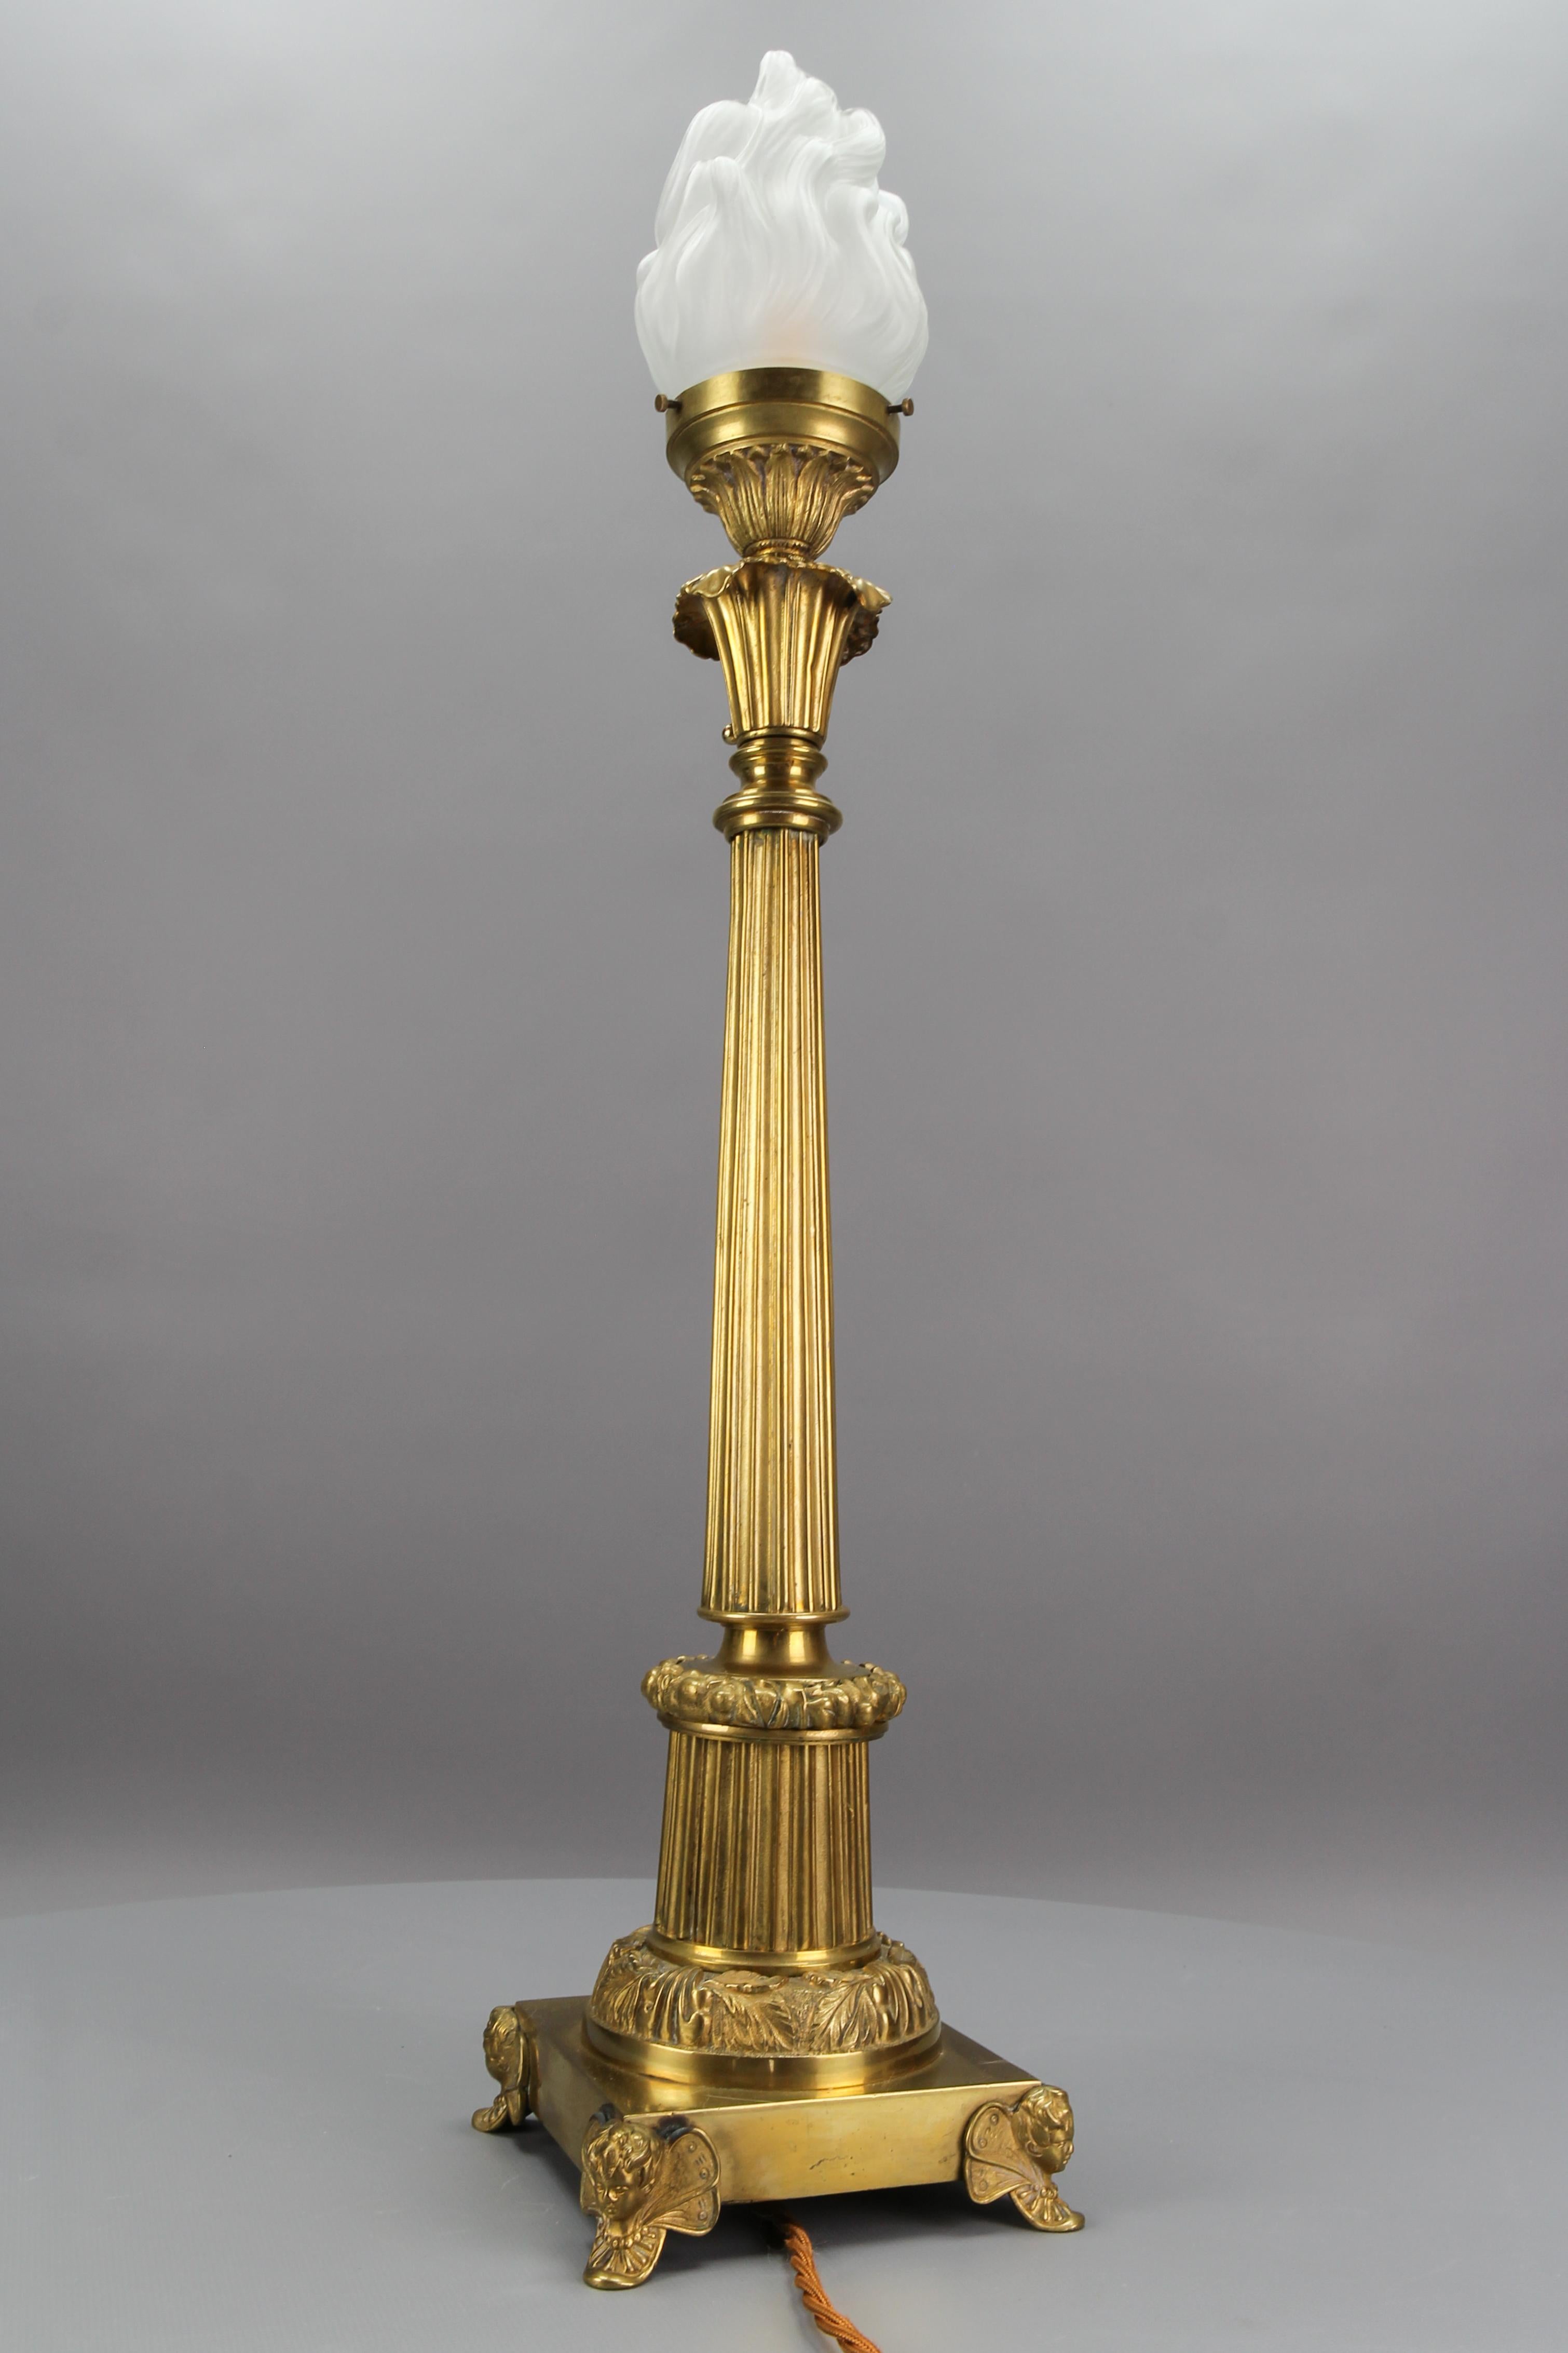 French bronze and frosted glass fluted column table lamp, circa the 1920s.
This impressive Art Deco period bronze lamp with a flame-shaped white frosted glass lampshade is standing on a square base supported by winged cupids on the edges, having a